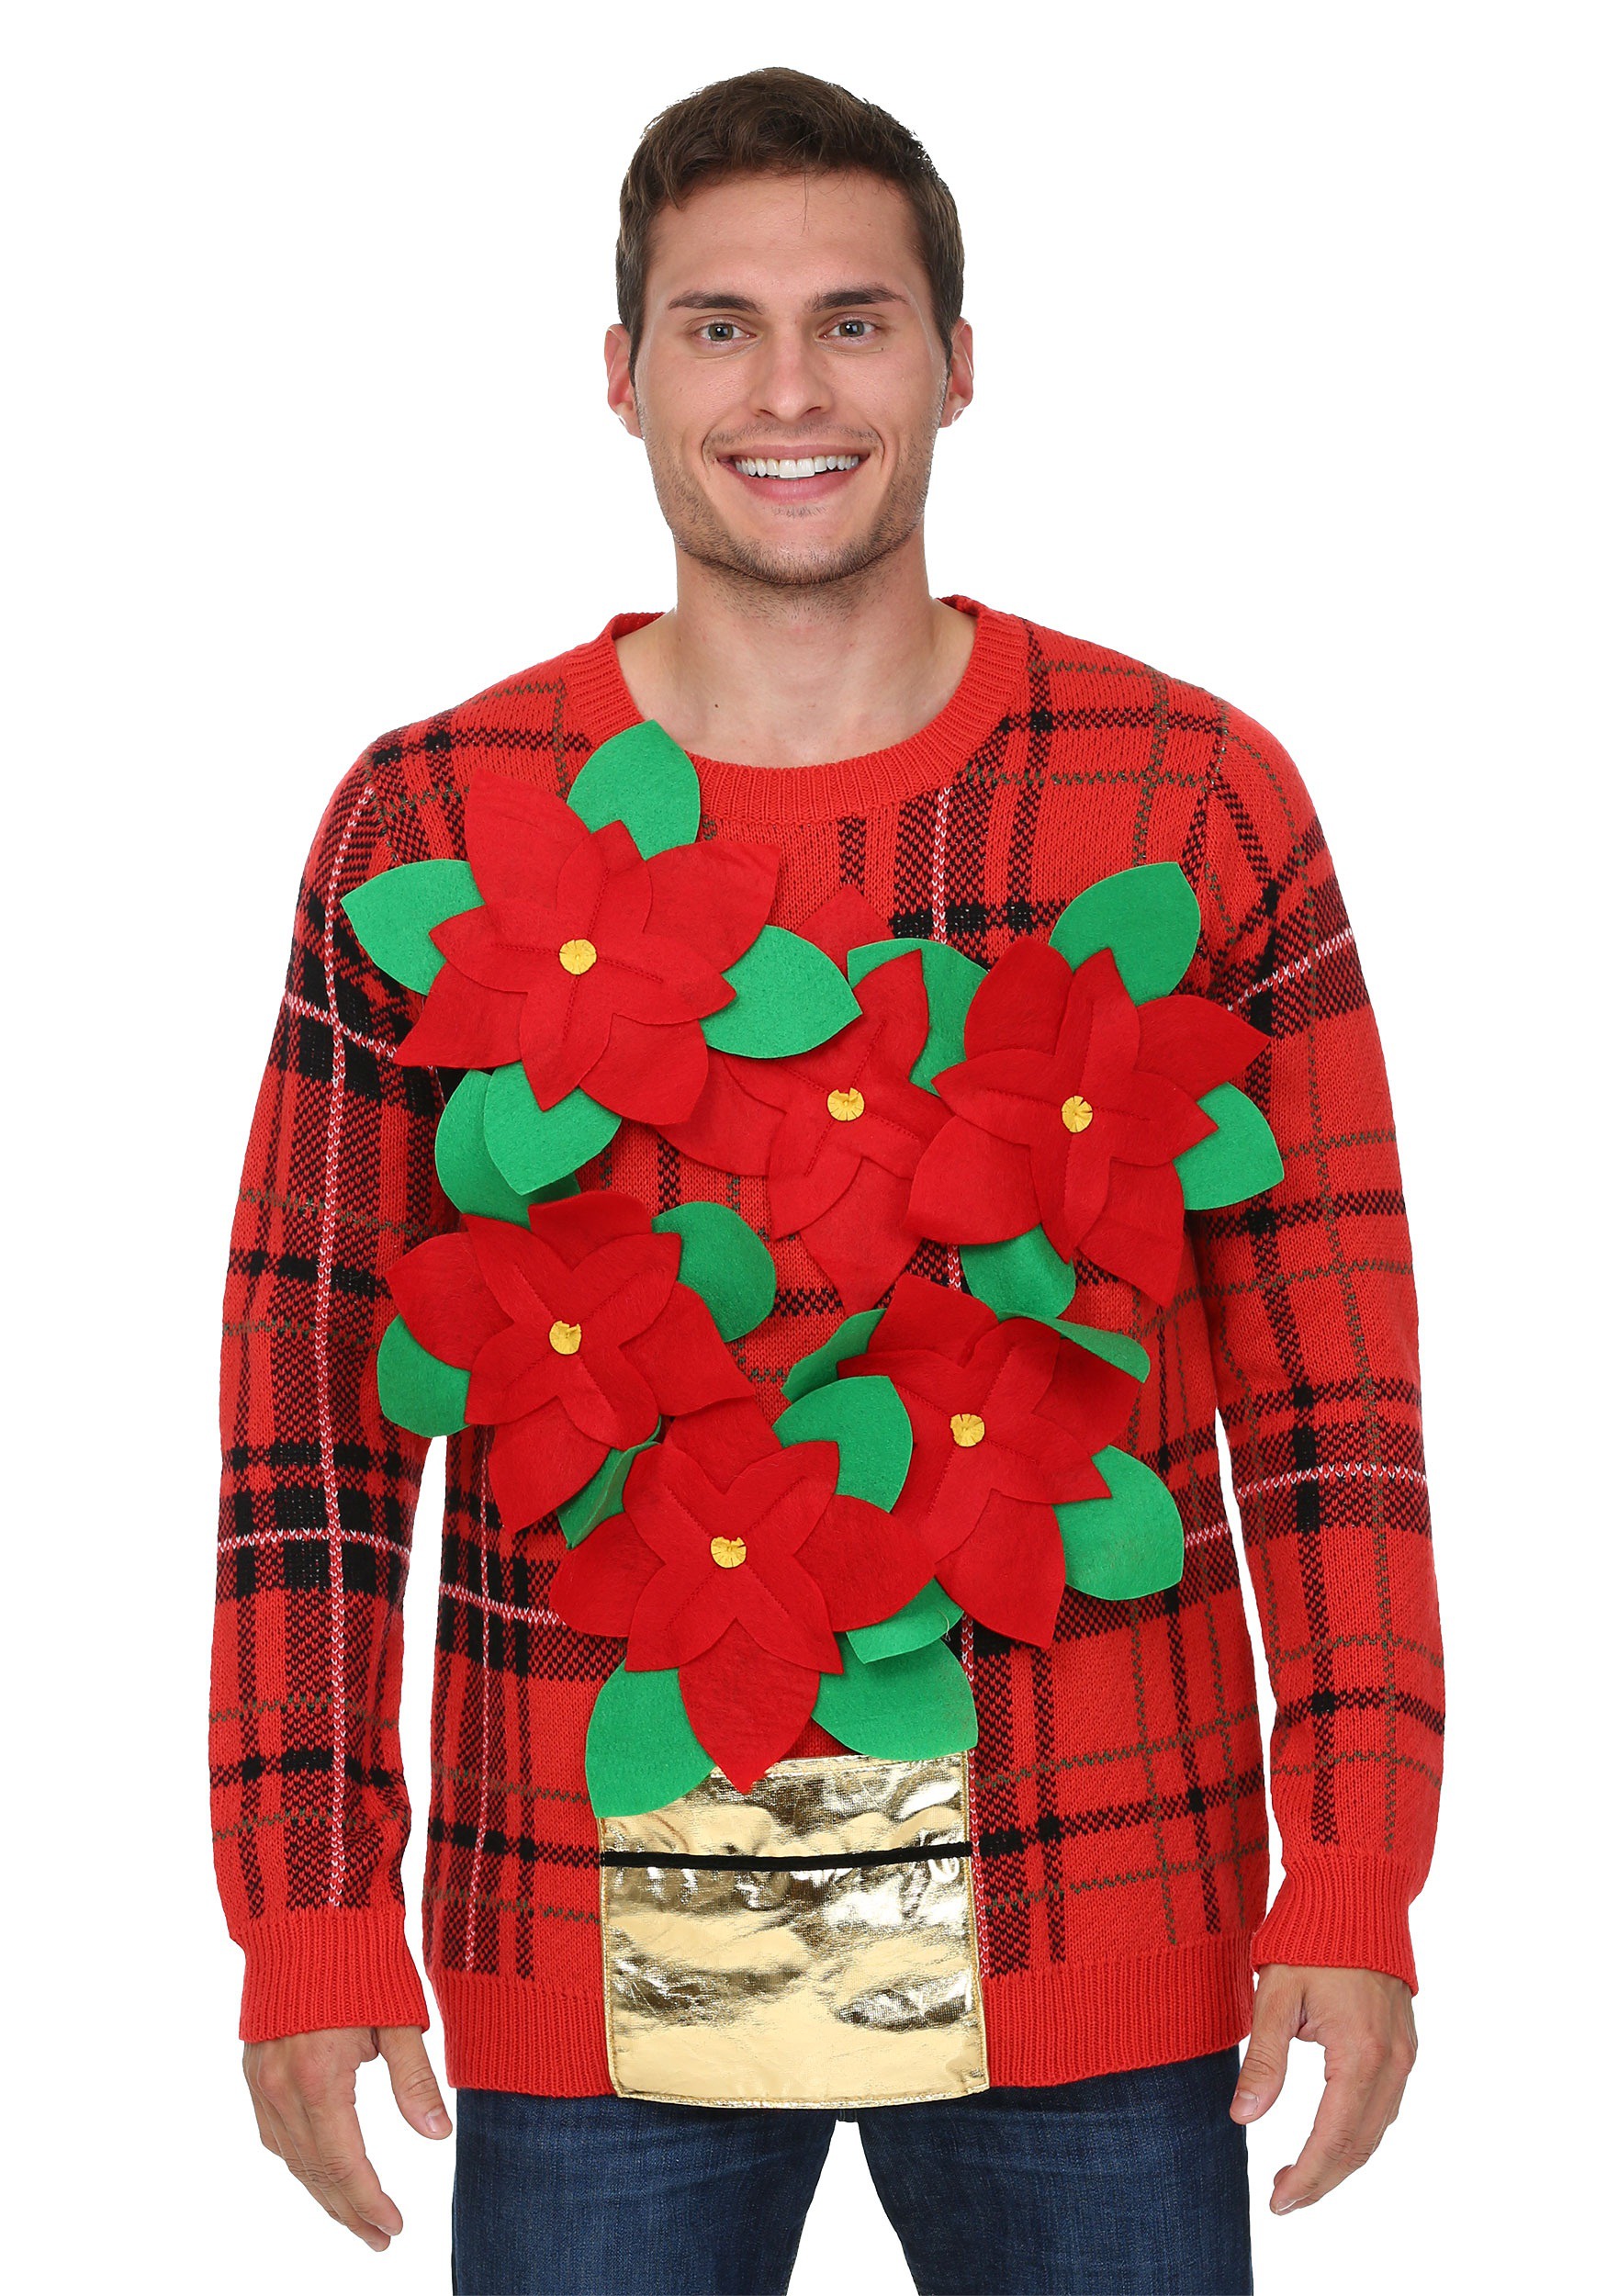 Poinsettia Ugly Christmas Sweater